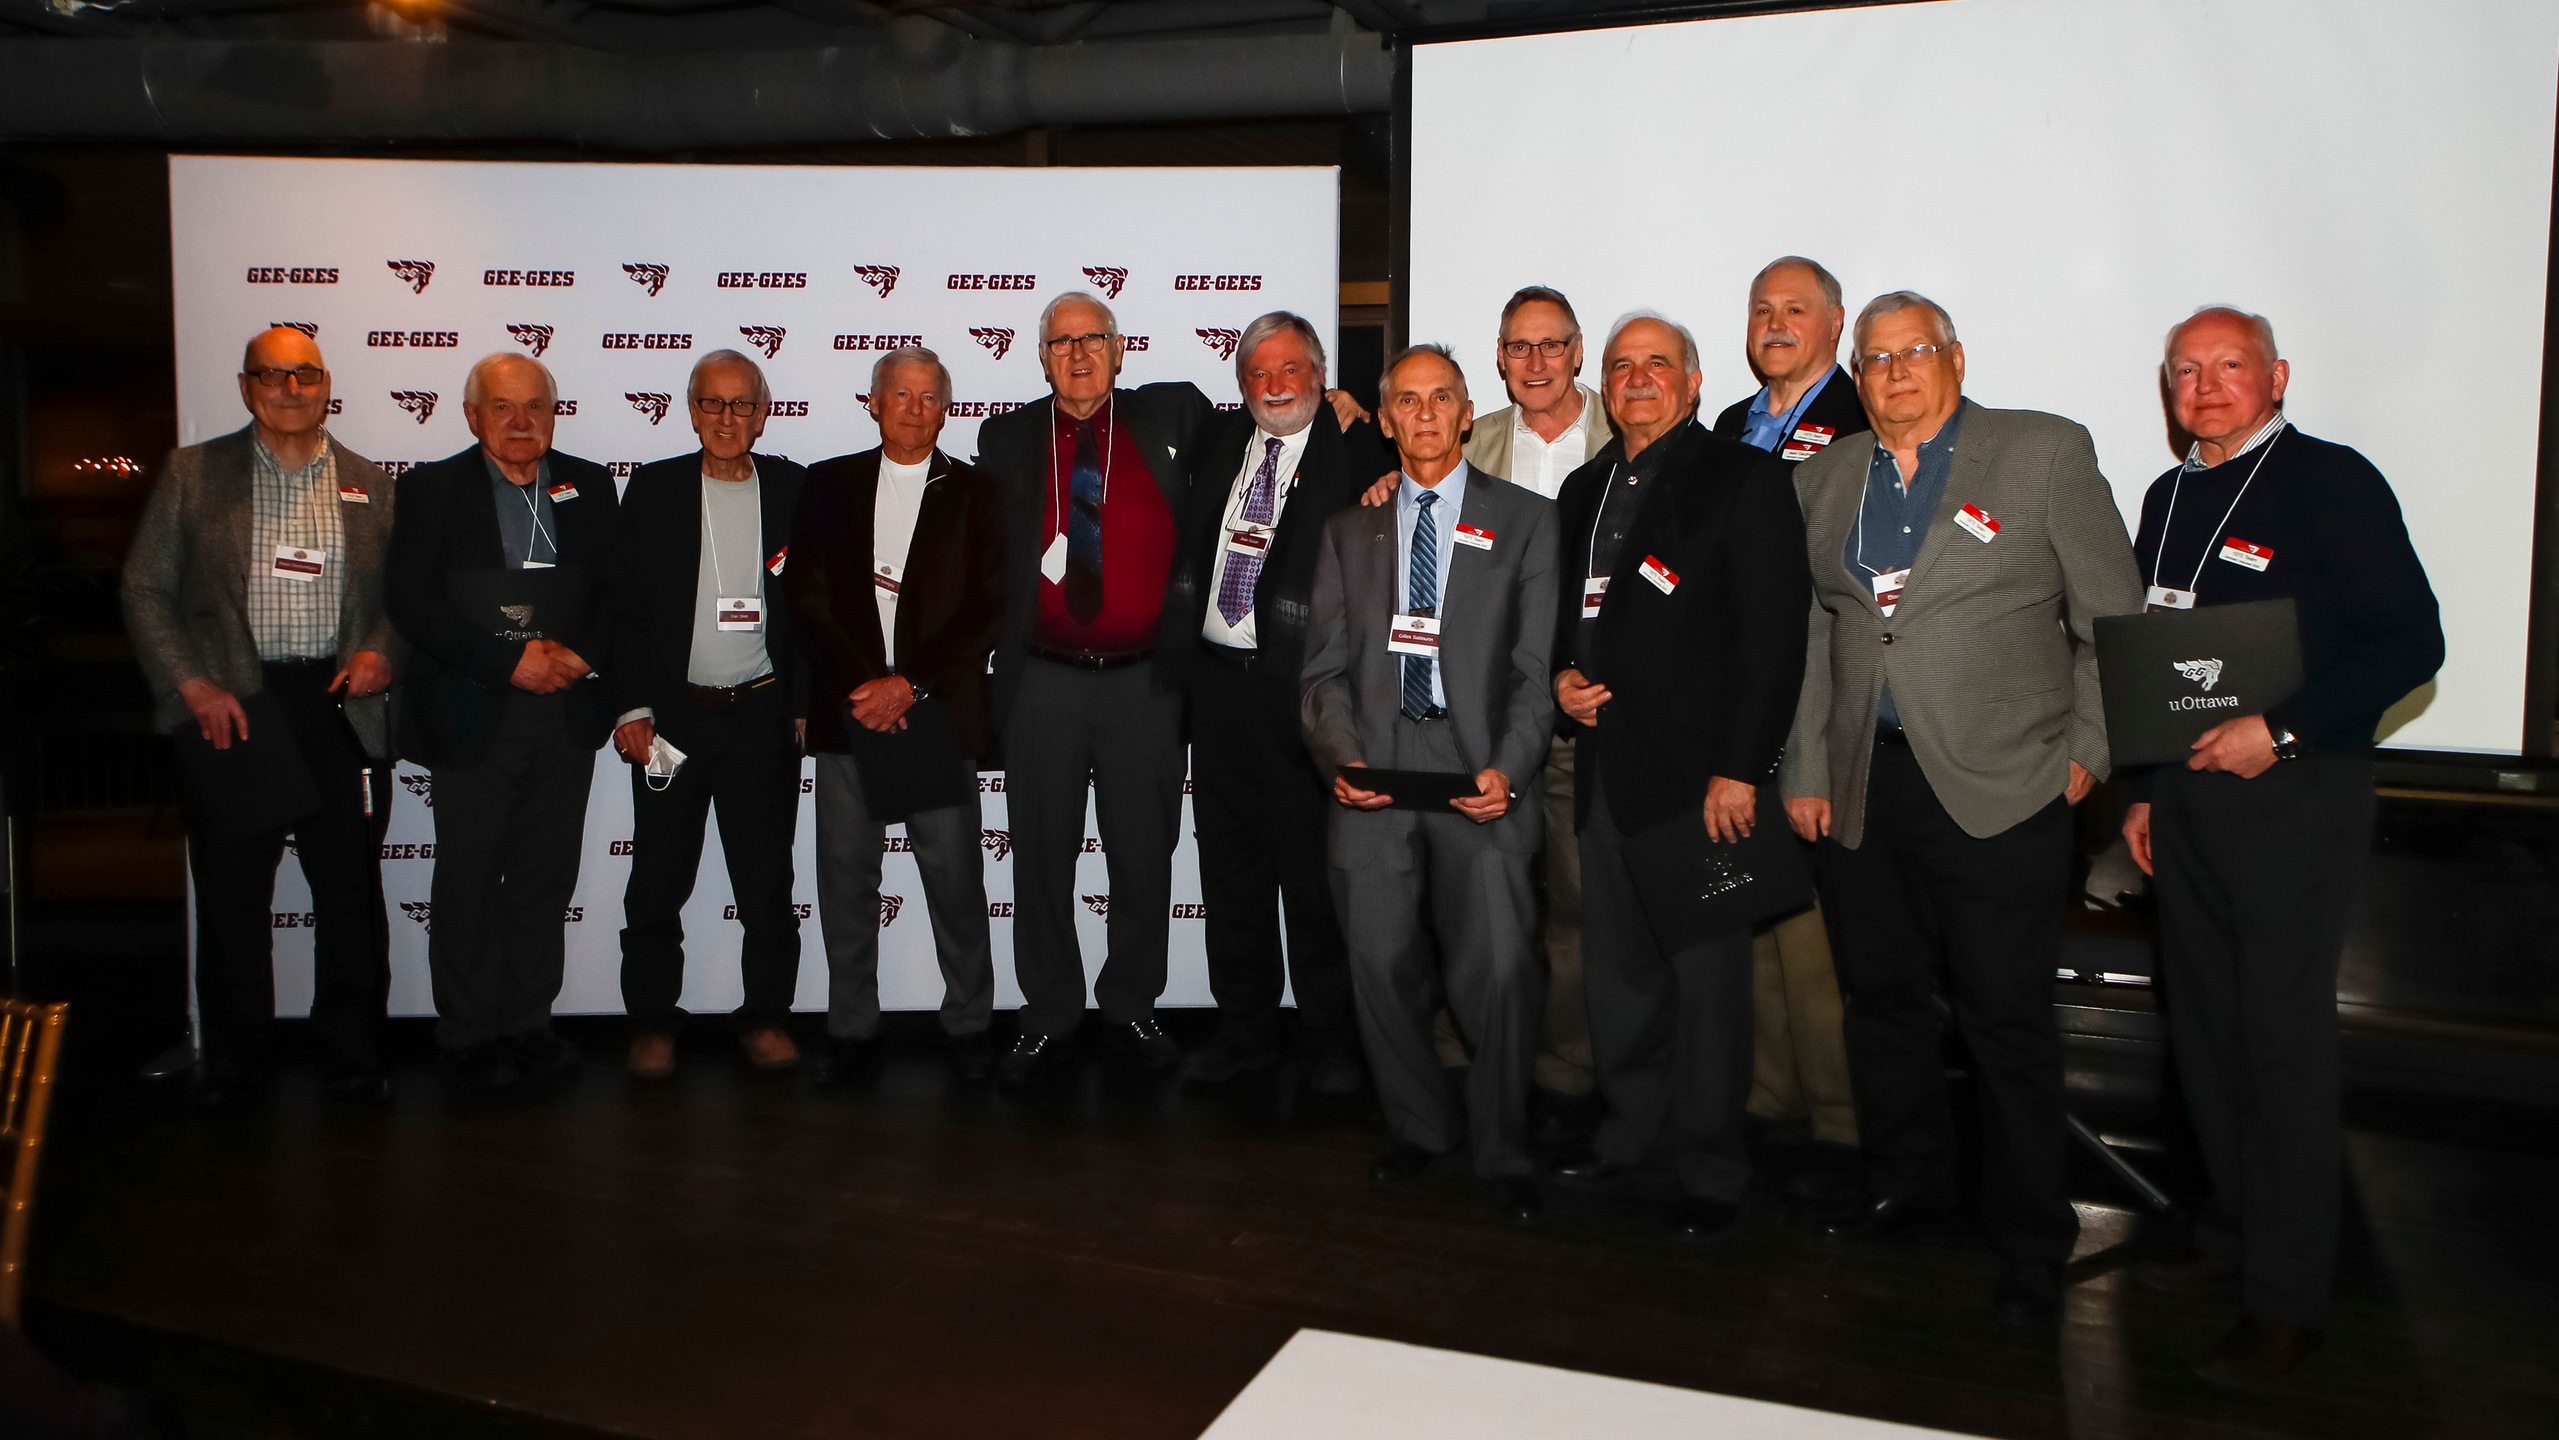 Members of the 1970 team at an event in 2022.